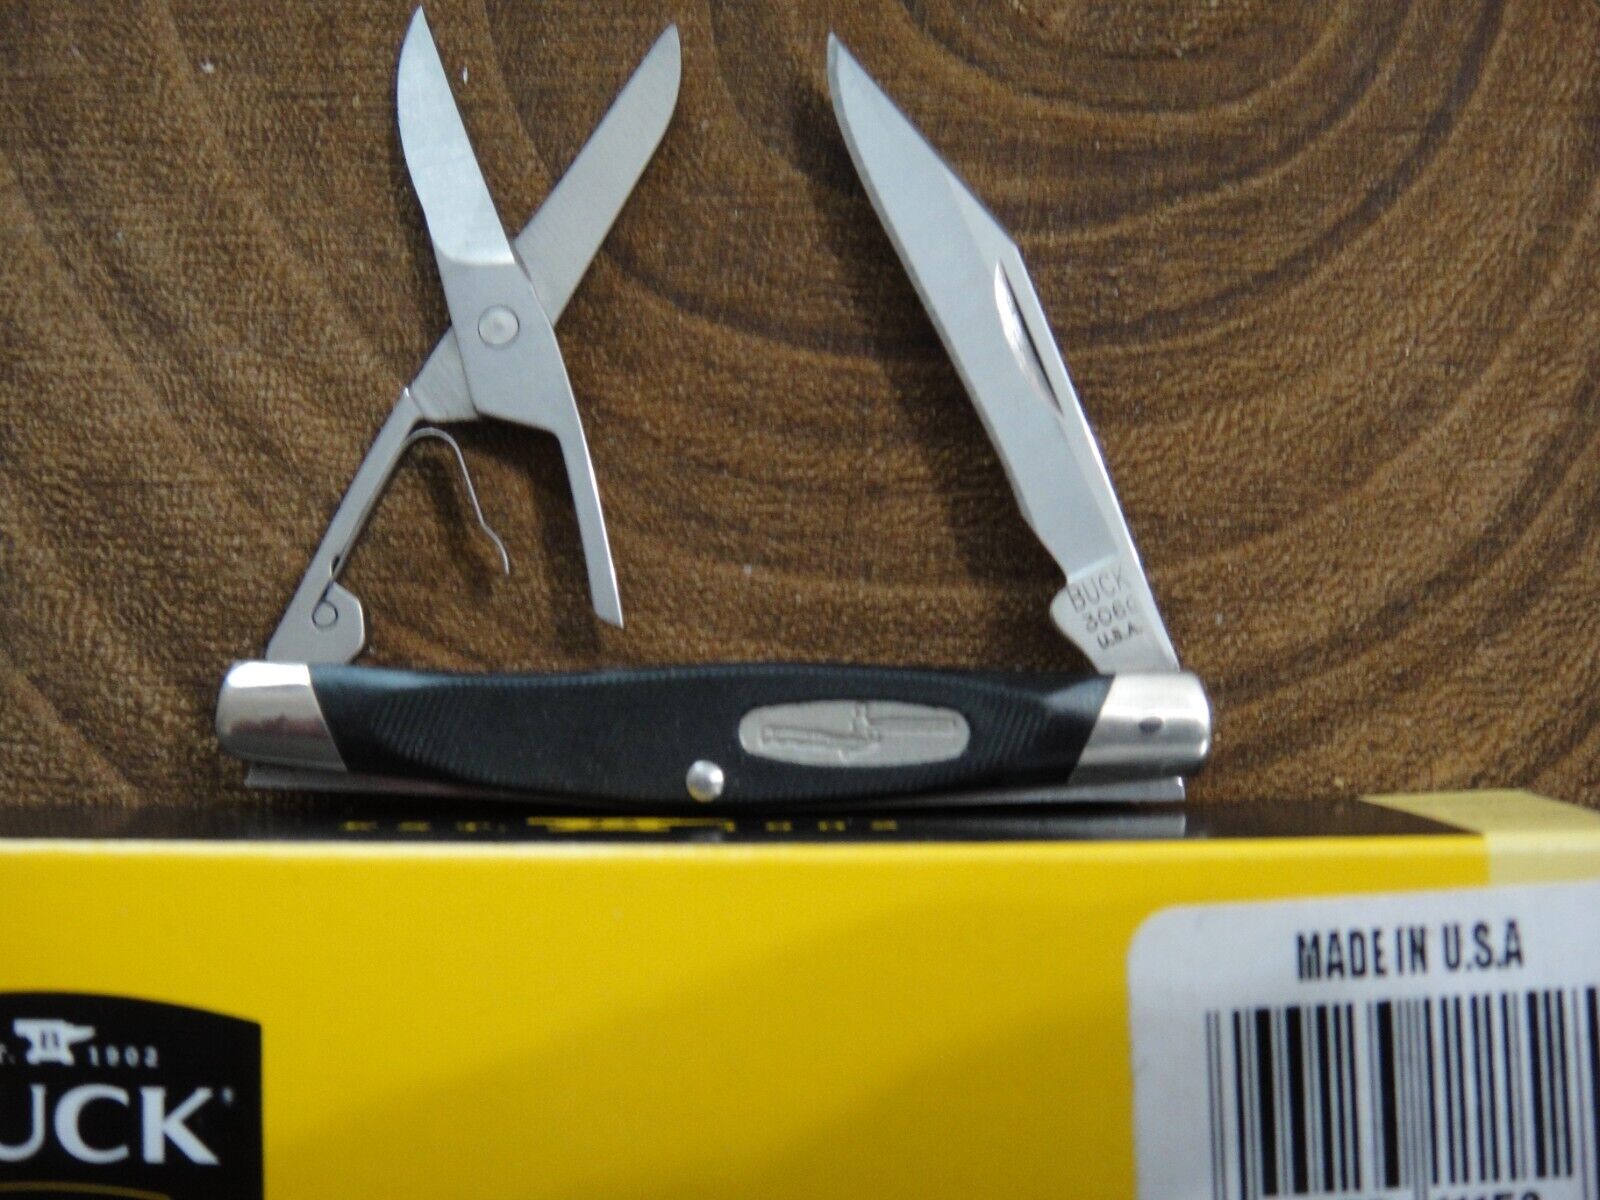 Buck Knife Lancer Scissors USA Made Discontinued New in Box